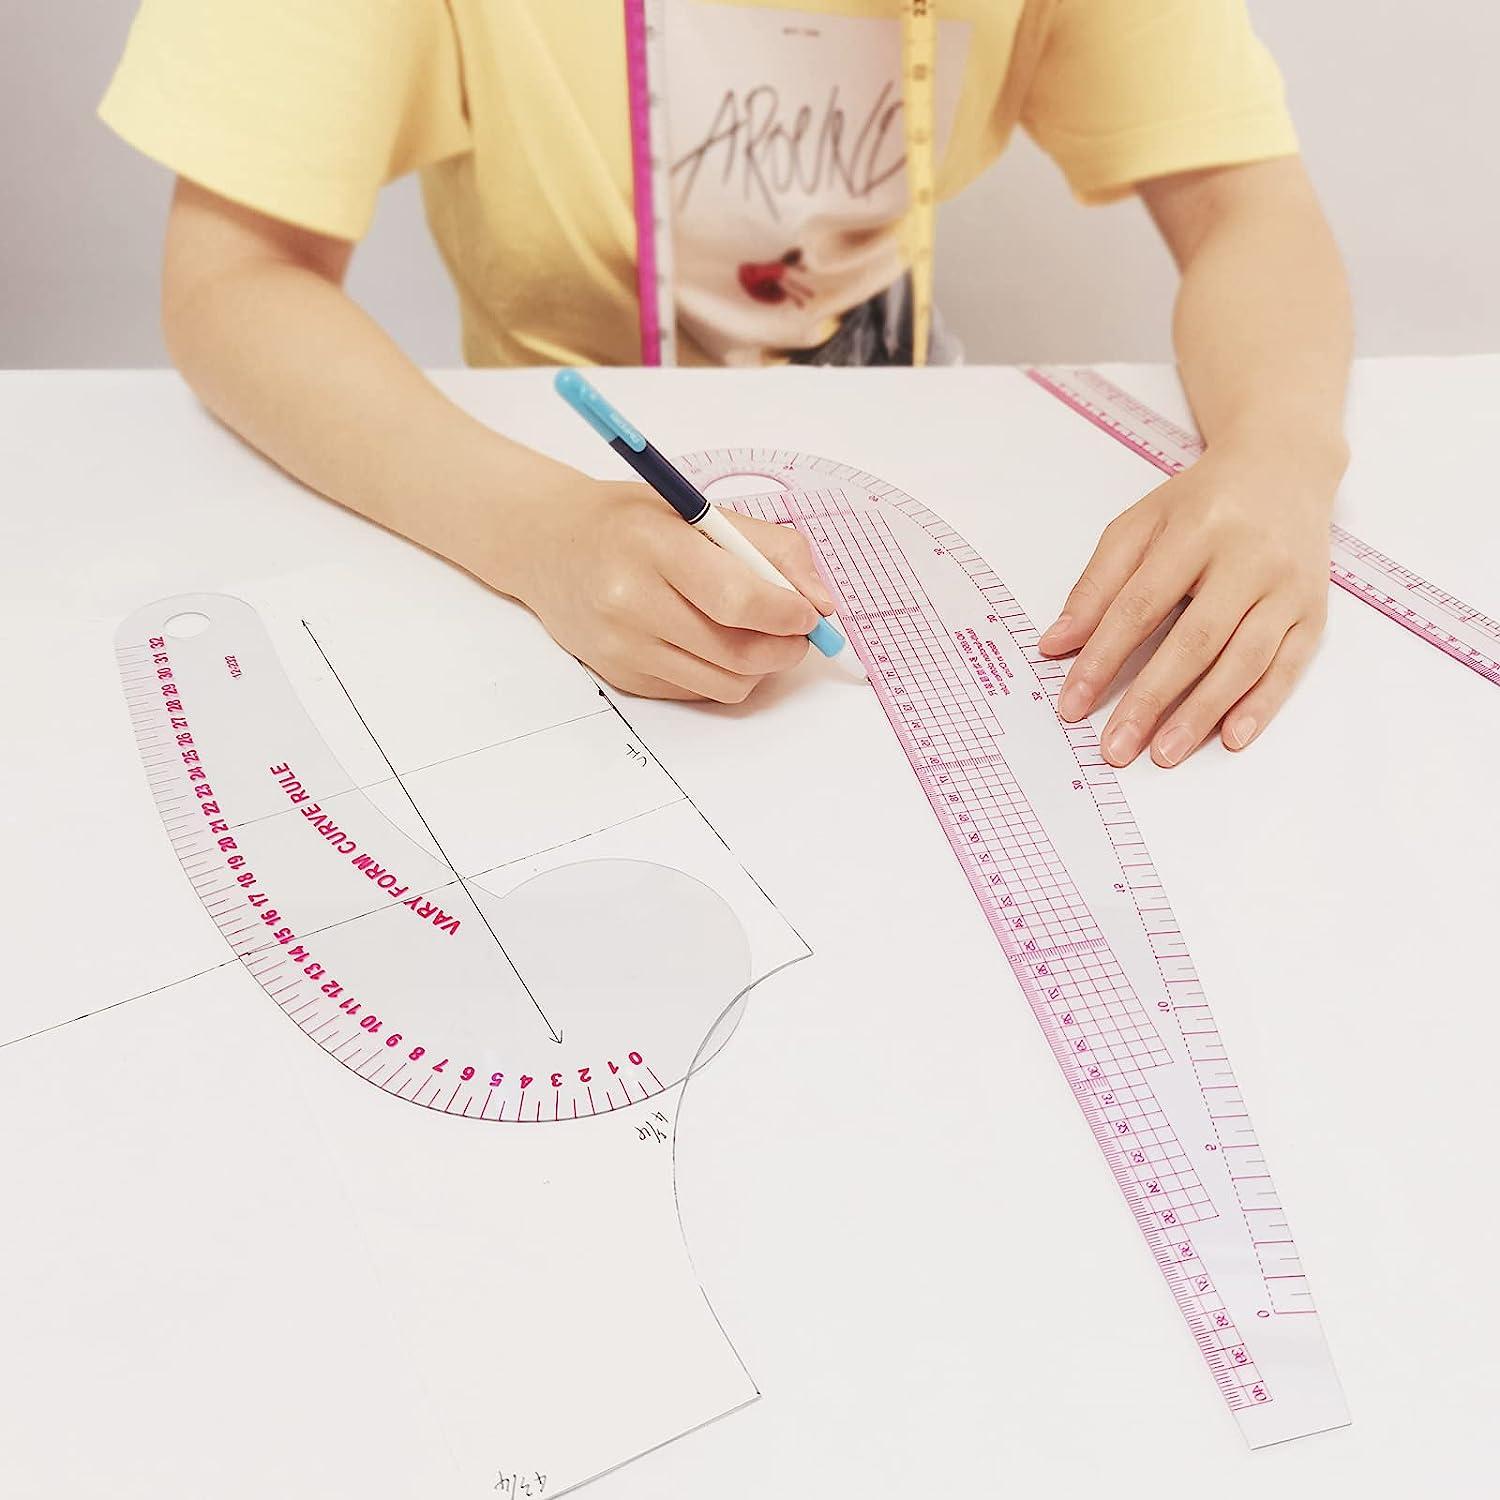 HLZC French Curve Ruler for Pattern Making, 15 Pieces Clear Sewing Ruler  Set for Beginners Tailors Designers